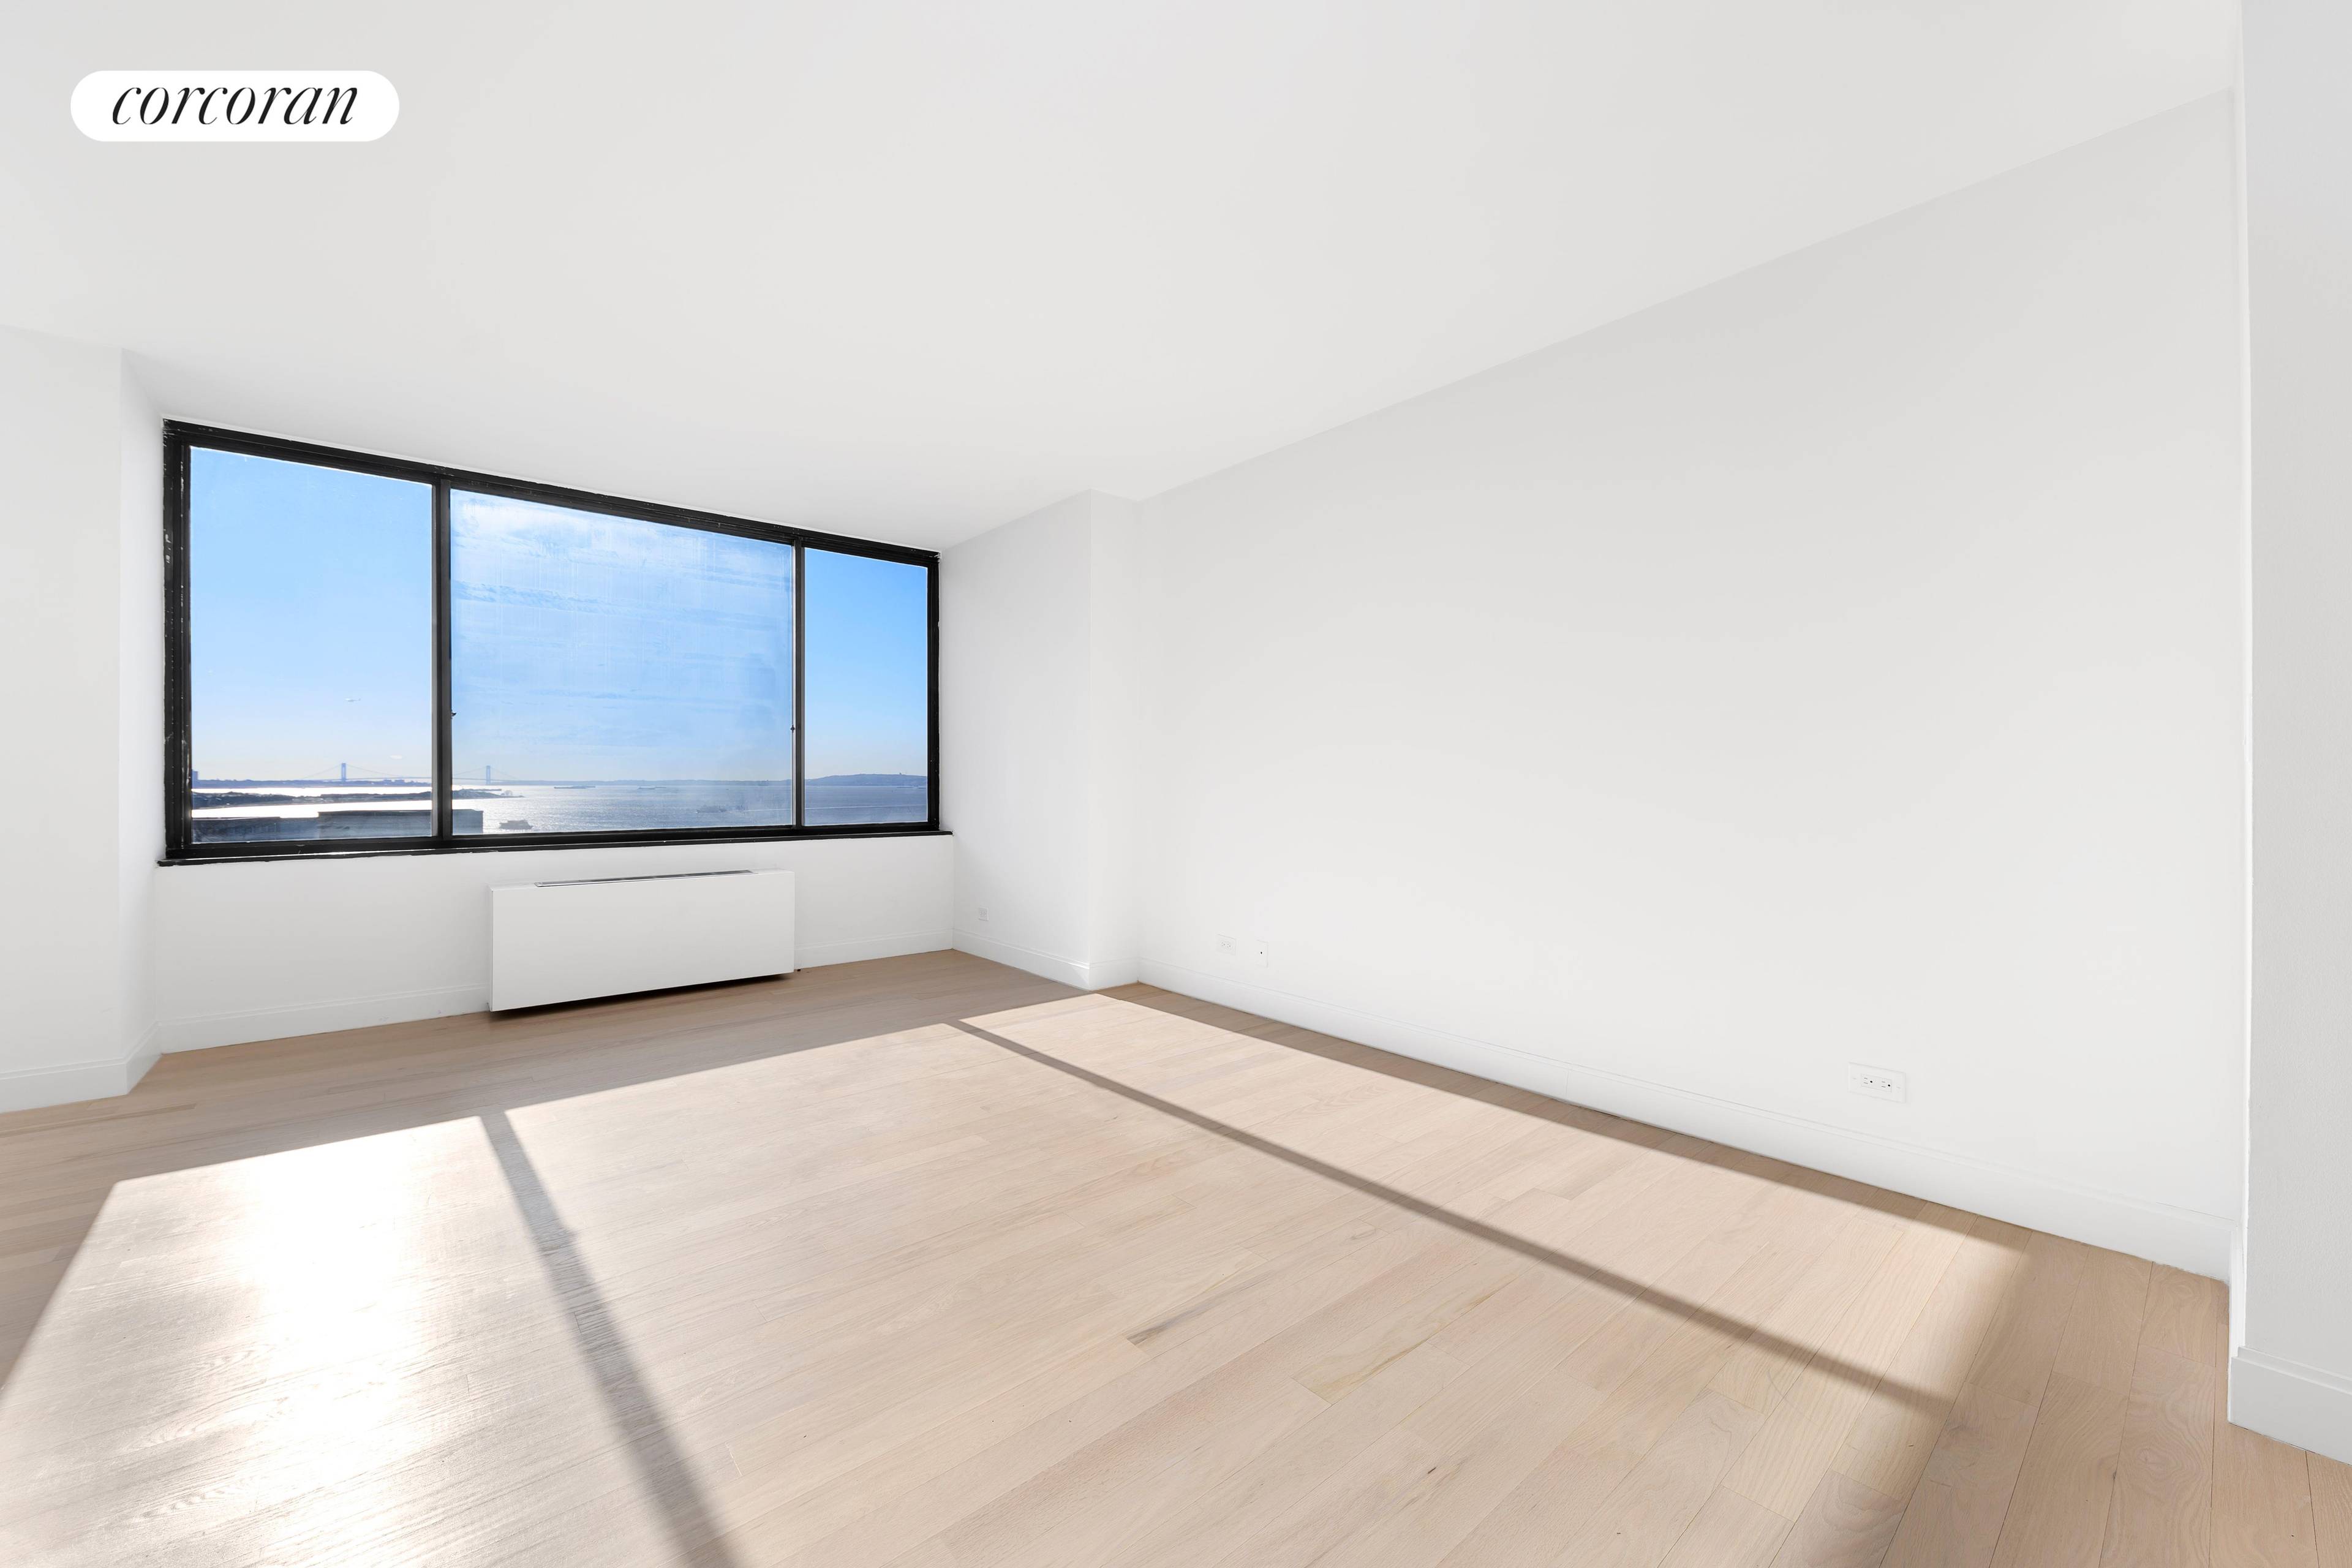 Luxury Living in Battery Park City This renovated west facing 1BR 1BA residence features a generously proportioned living space with direct river and statue of liberty views.